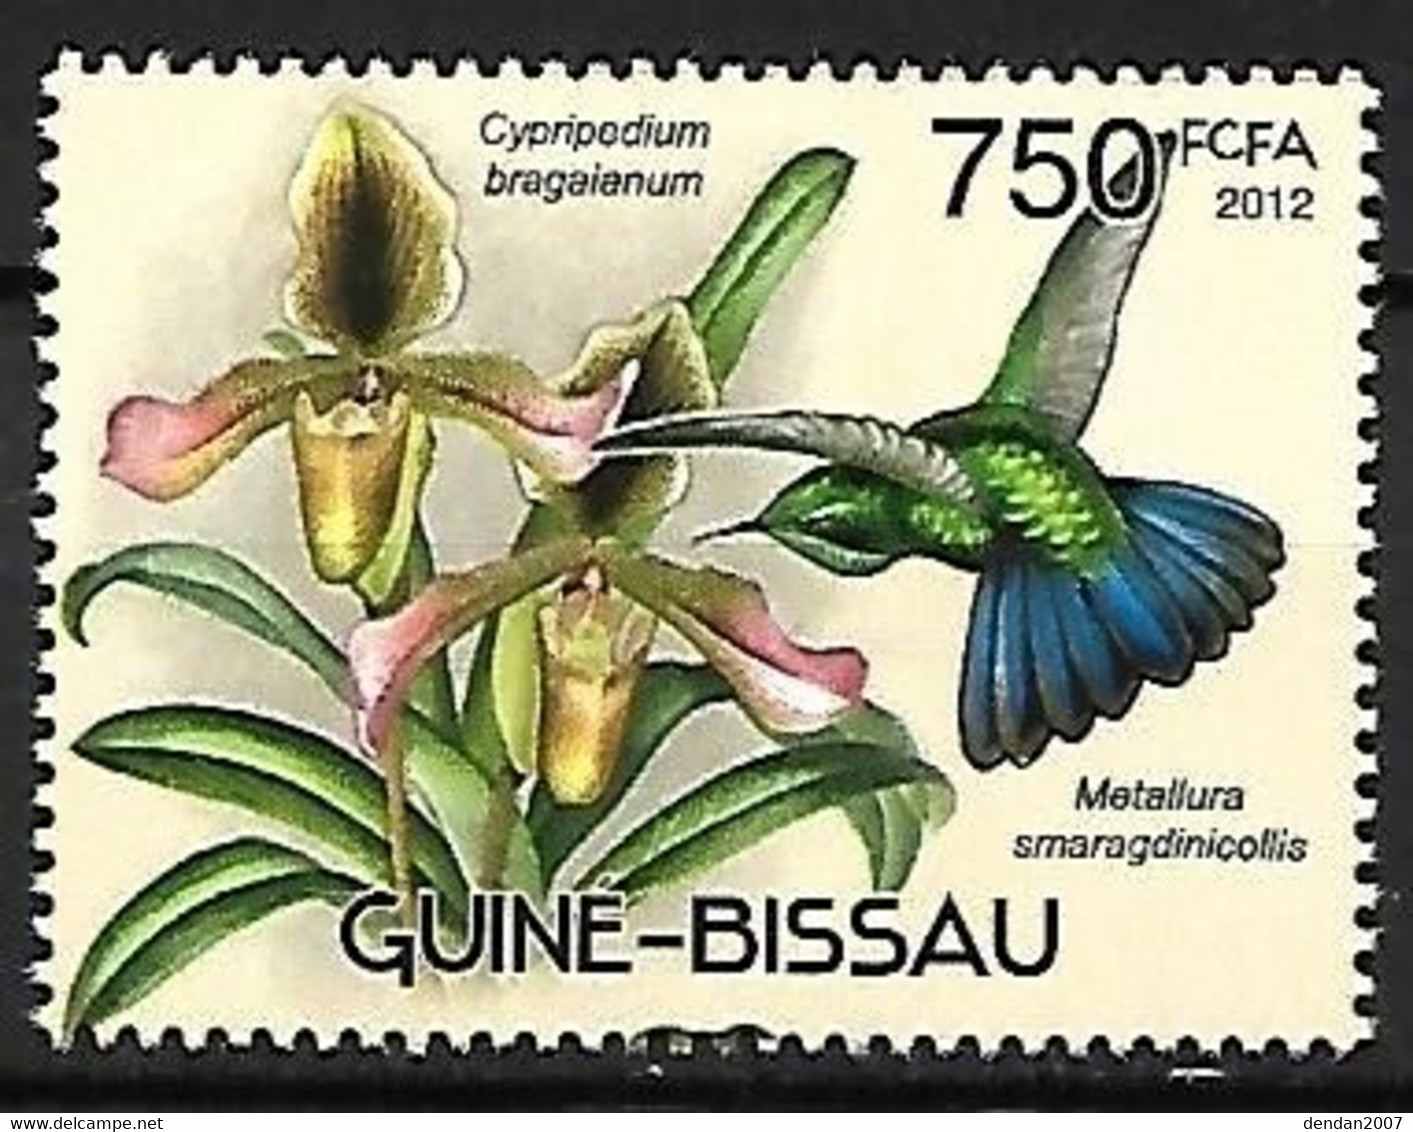 Guinea Bissau - MNH ** 2012 : Hummingbirds And Orchids : Tyrian Metaltail   - Metallura Tyrianthina - Colibríes